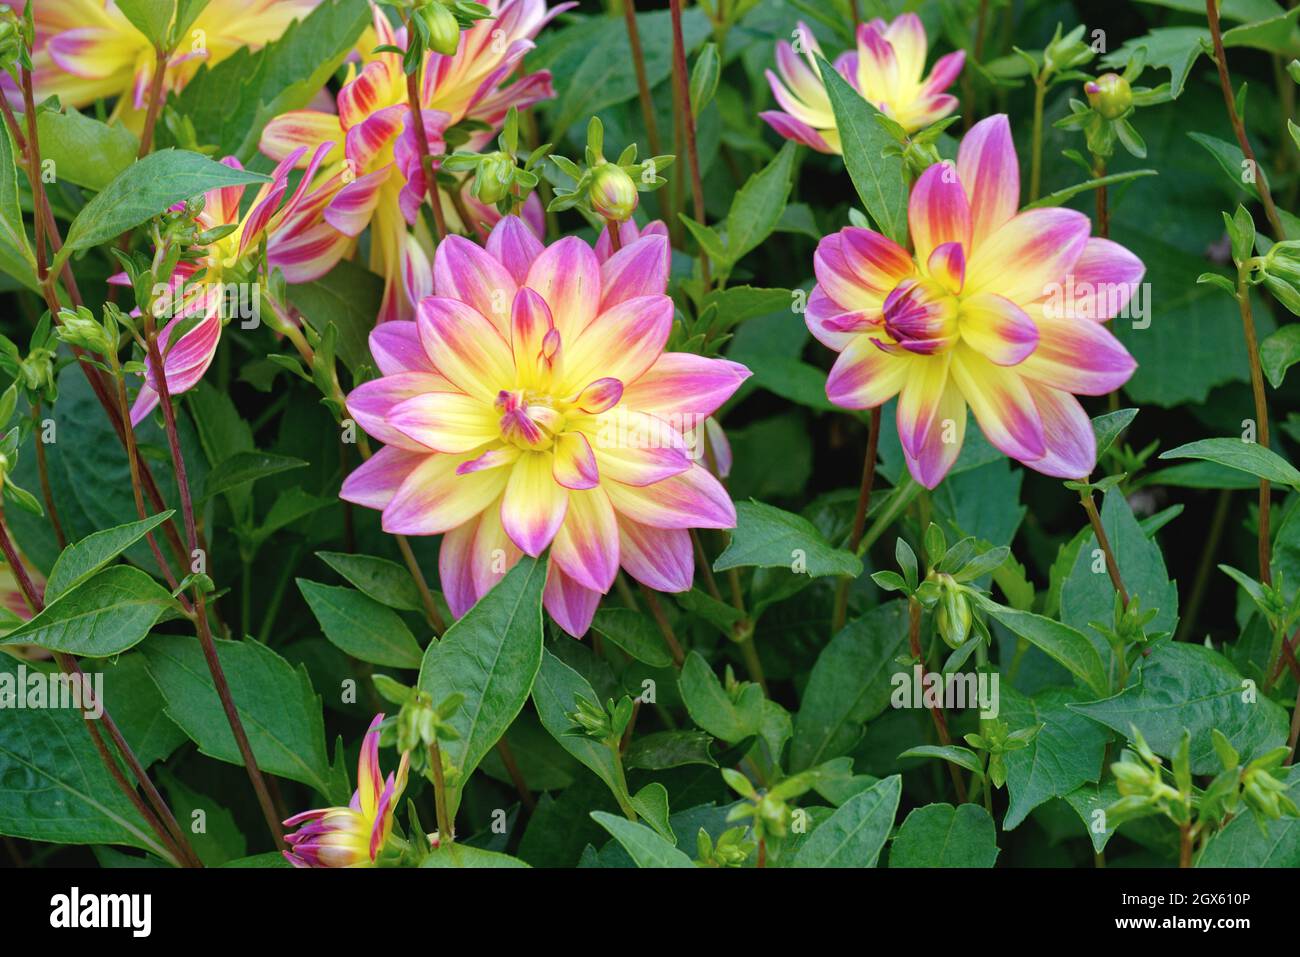 Close up of the bicolour flower of the Dahlia Pacific Ocean Stock Photo